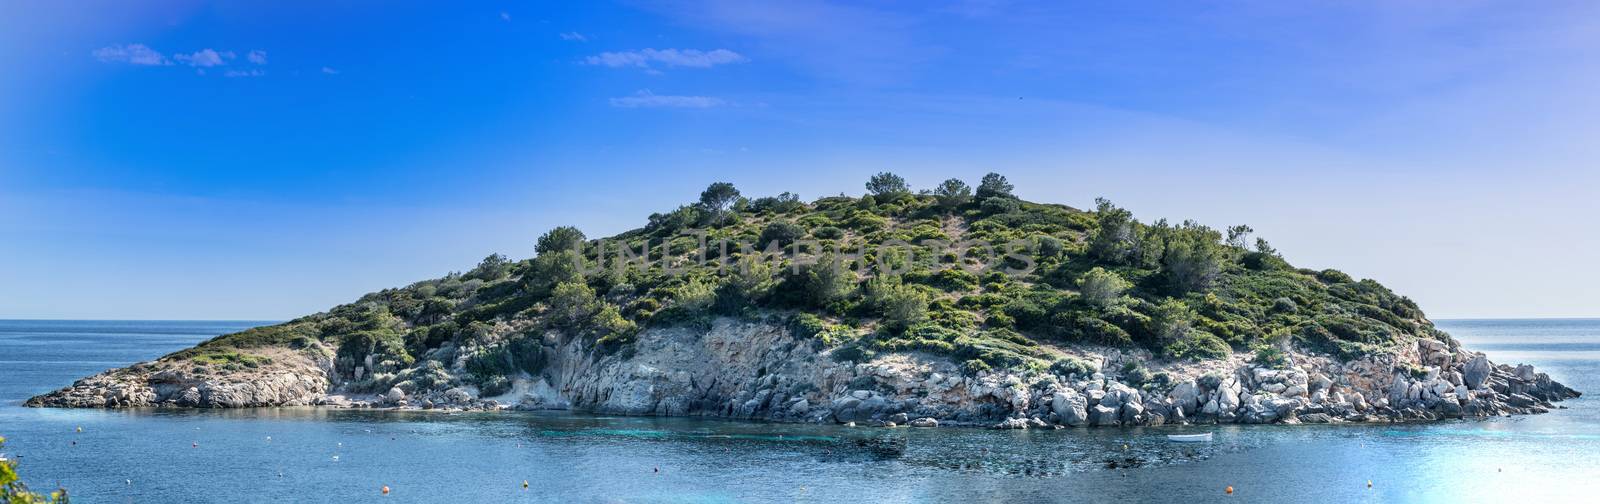 Panoramic view of the island Es Pantaleu by JFsPic